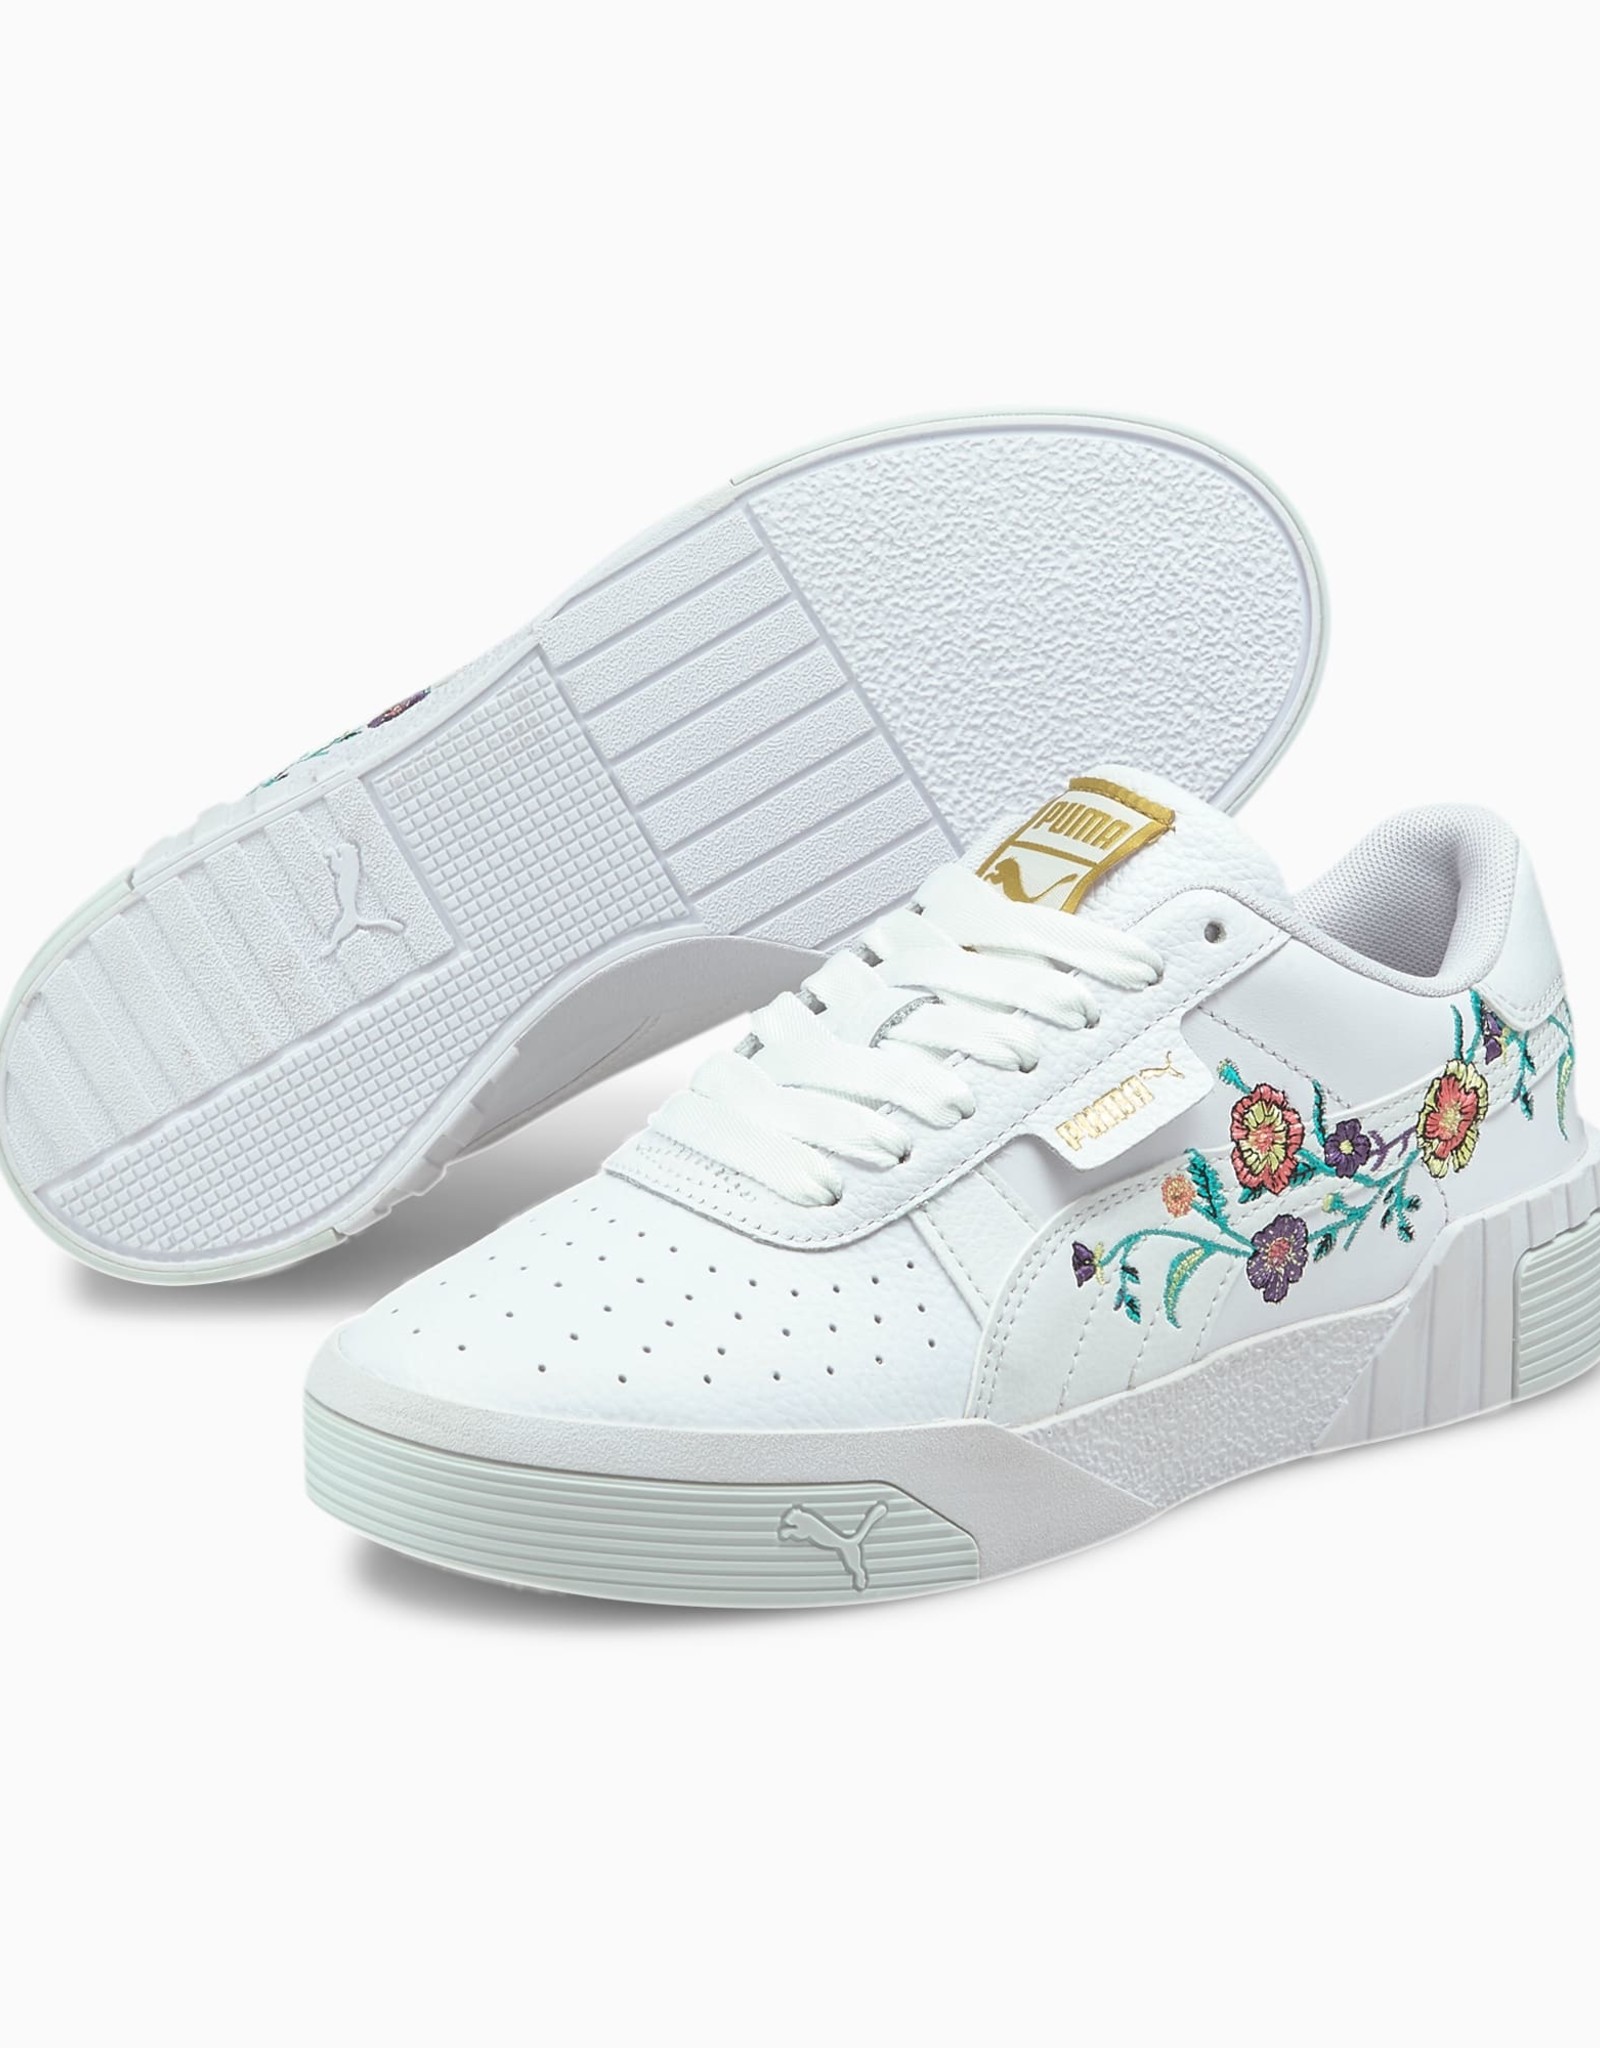 PUMA Cali Floral Wn's Sneakers - The 